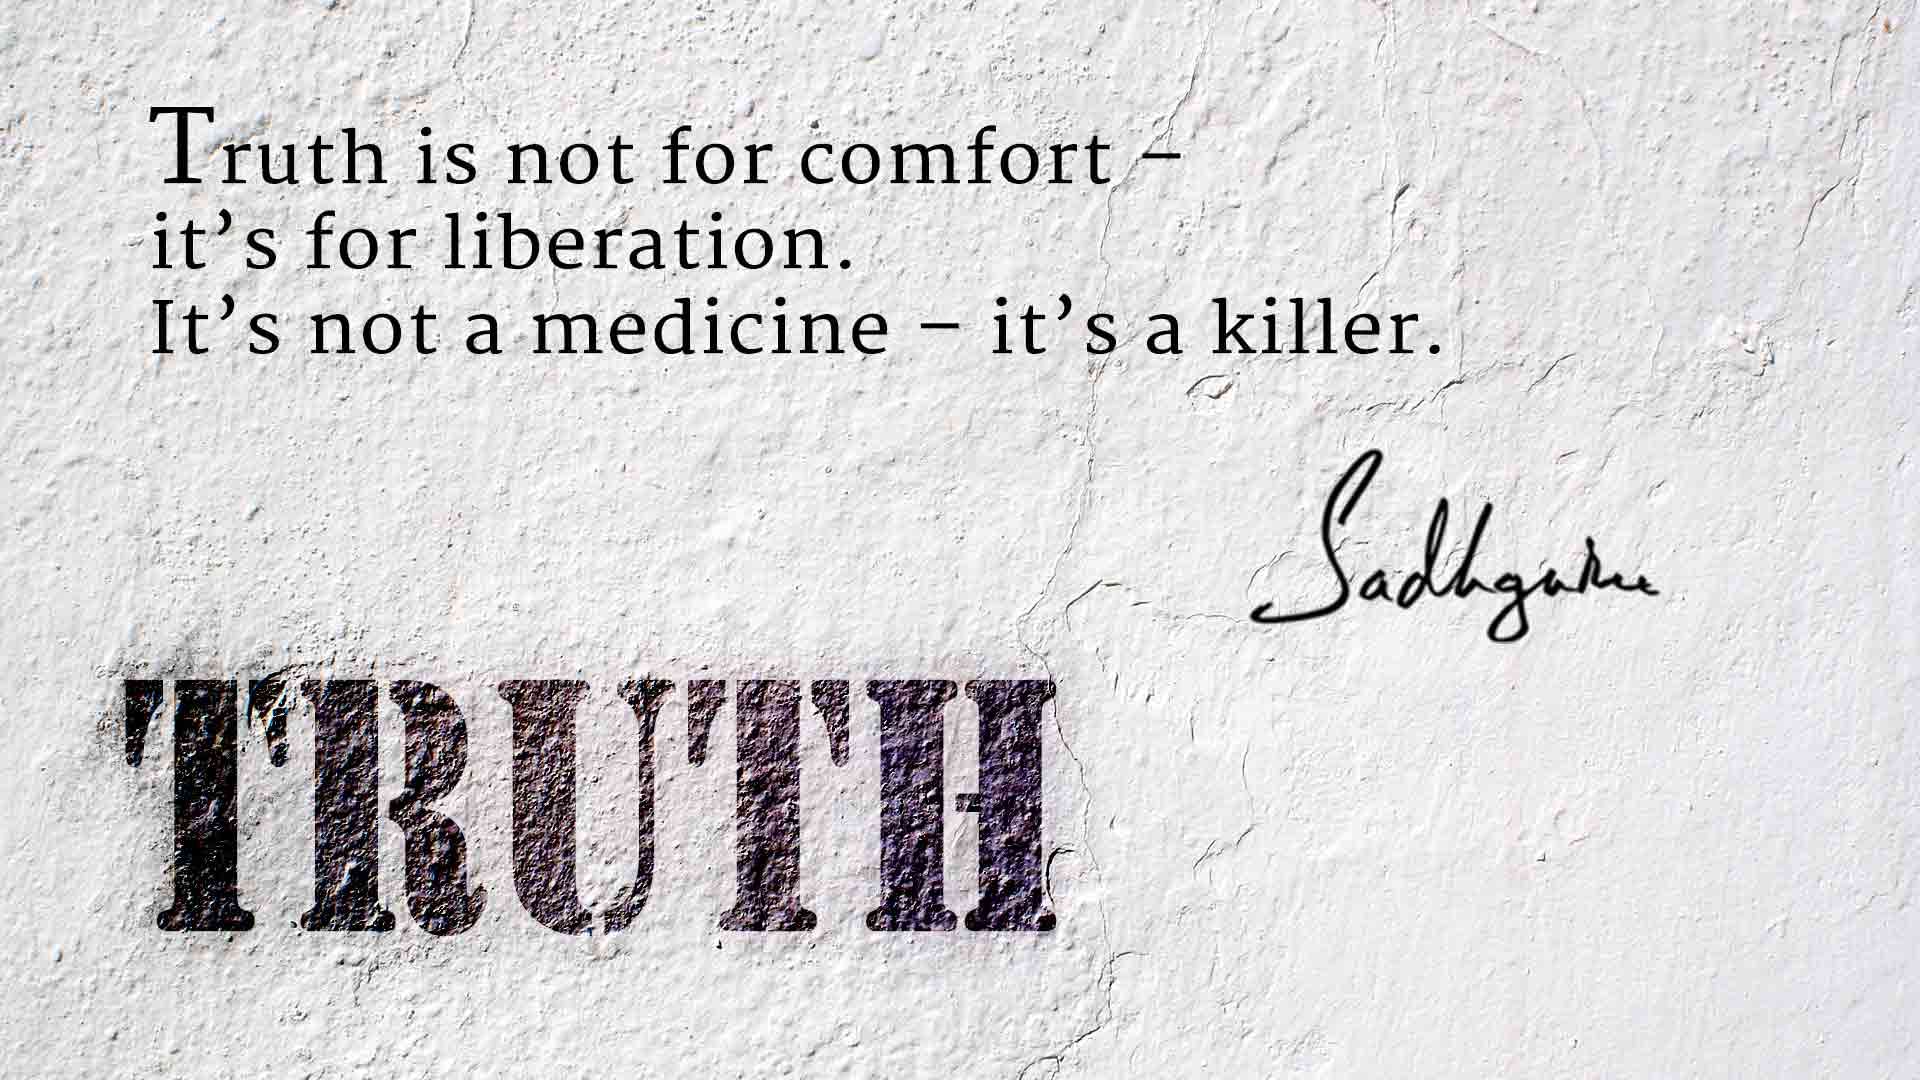 Sadhguru quote on truth being for liberation not for confort